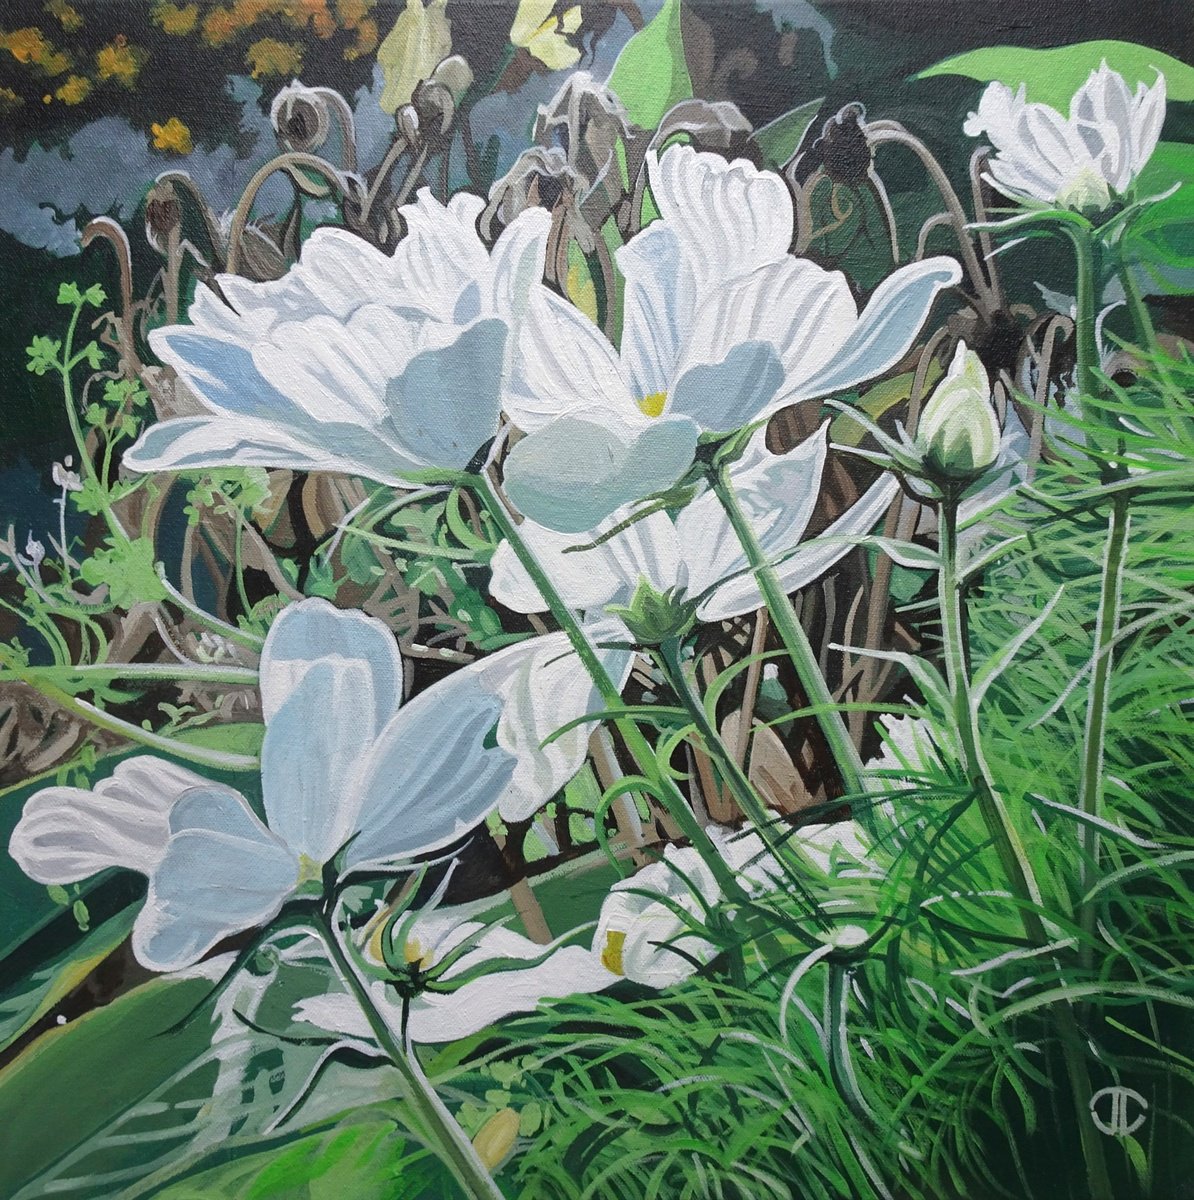 White Cosmos In The Sunlight by Joseph Lynch